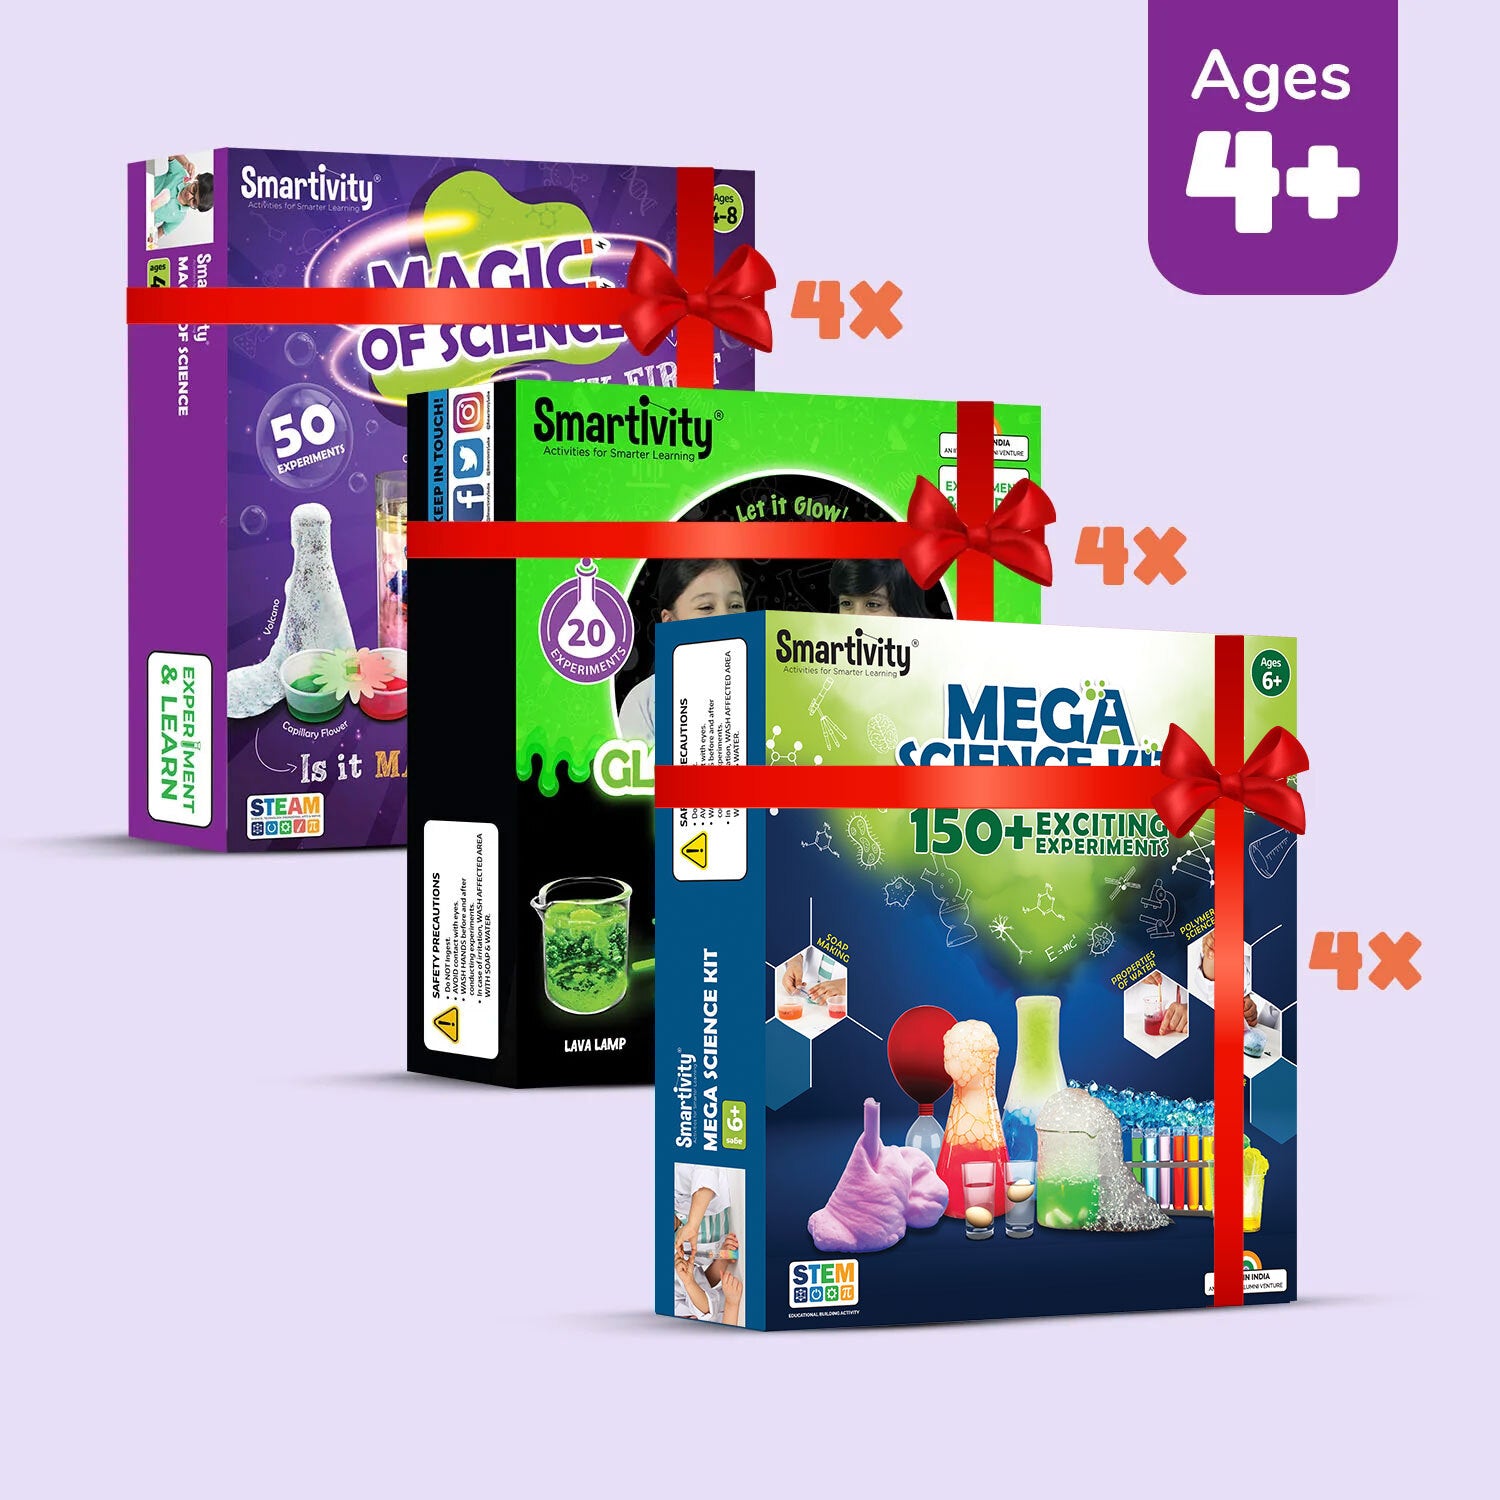 Science Experiment Kits|A Pack of 4 x 3 Units| Conduct Easy Scientific Experiments at Home| Best Gifts for Kids